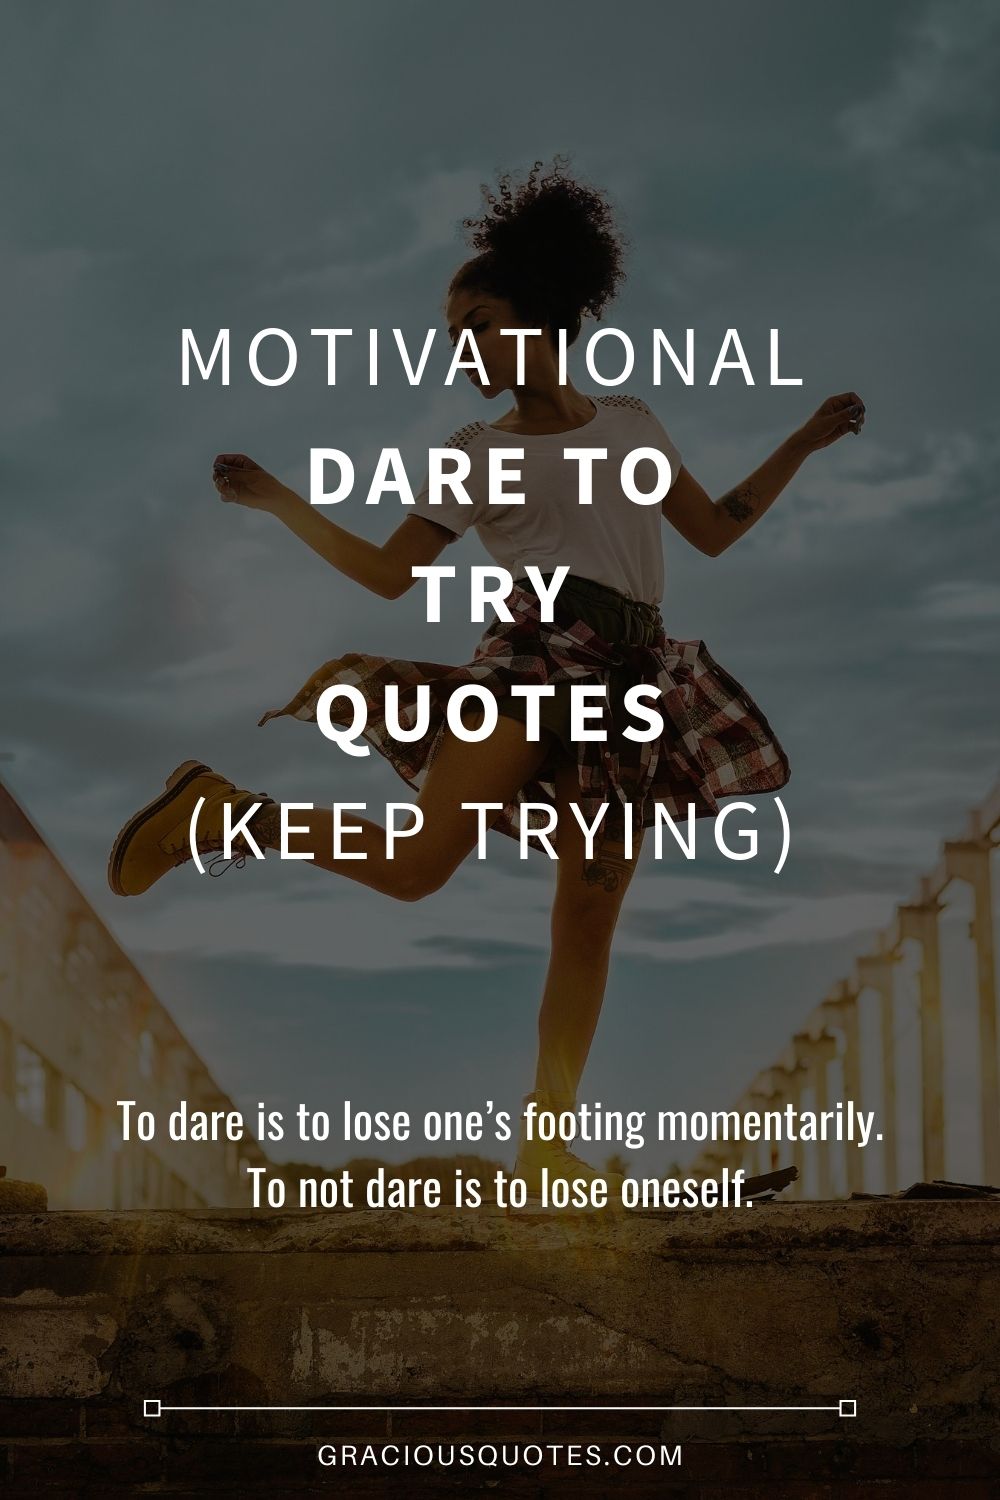 Motivational Dare to Try Quotes (KEEP TRYING) - Gracious Quotes